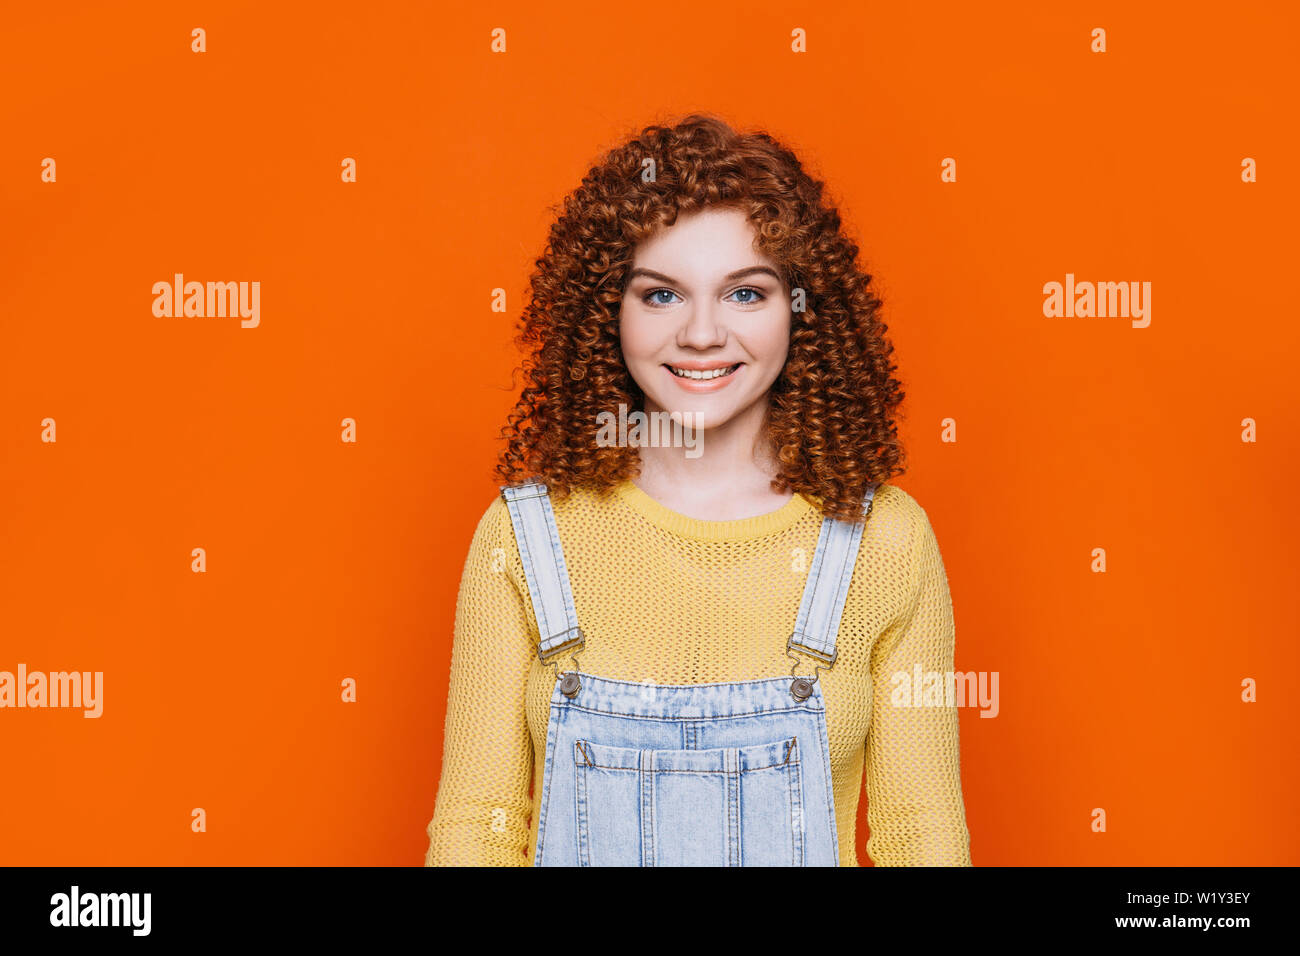 Curly- haired funny woman smiling and looking at camera on orange background Stock Photo